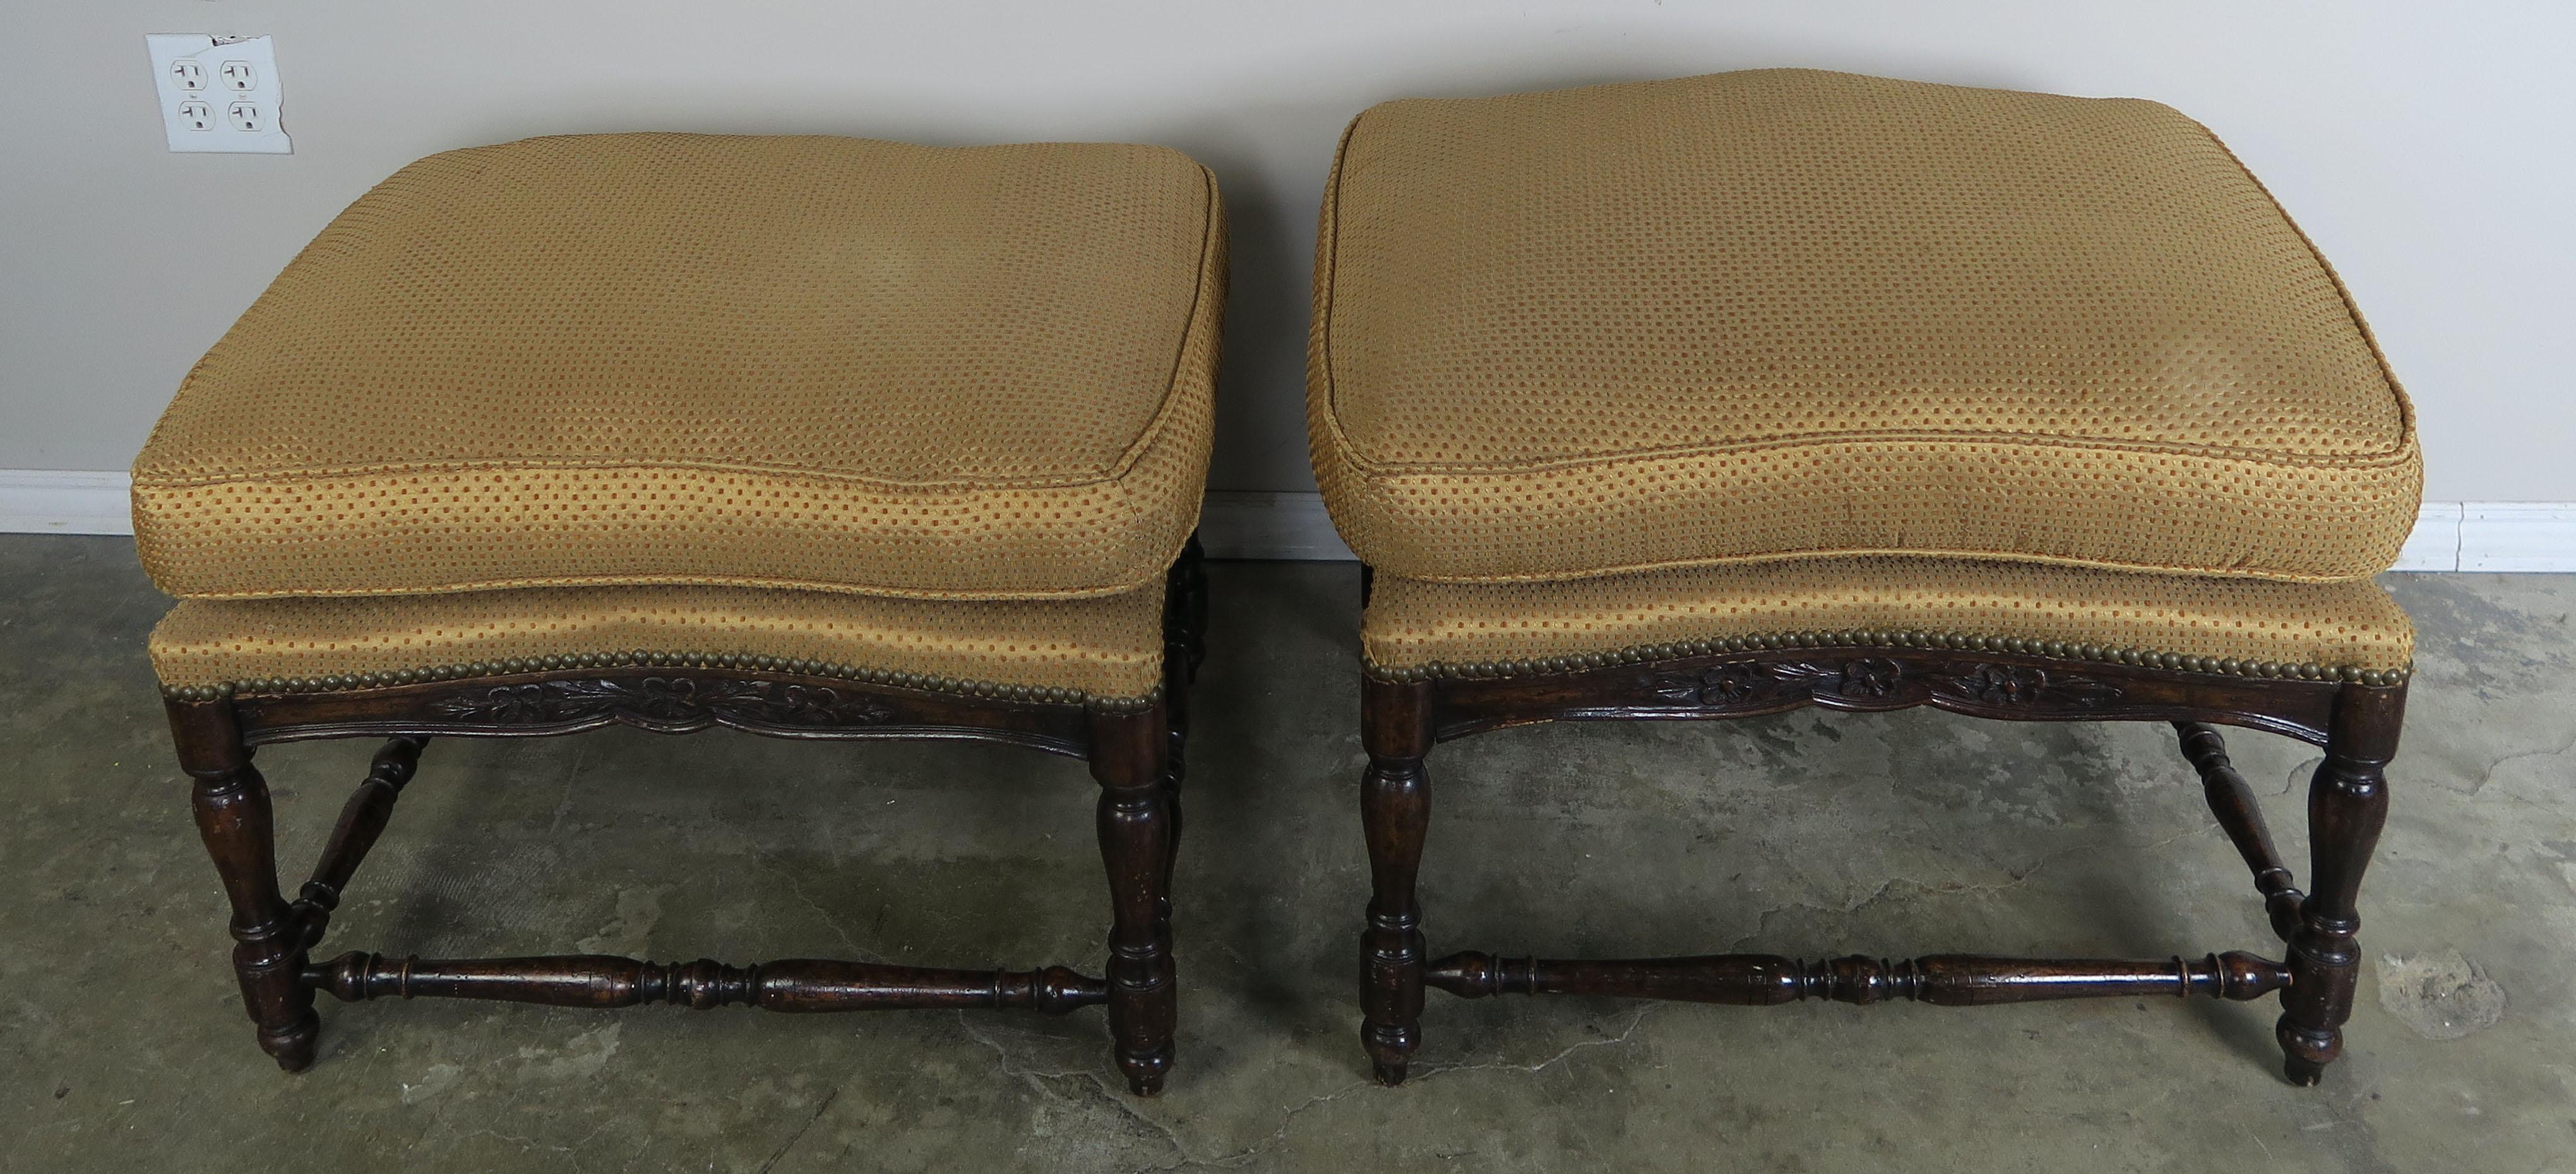 Pair of French Provincial style walnut benches that are upholstered in a high end golden colored designer silk with gold chenille flecks throughout and detailed with antique brass colored nailhead trim. The cushions have feather and down inserts.